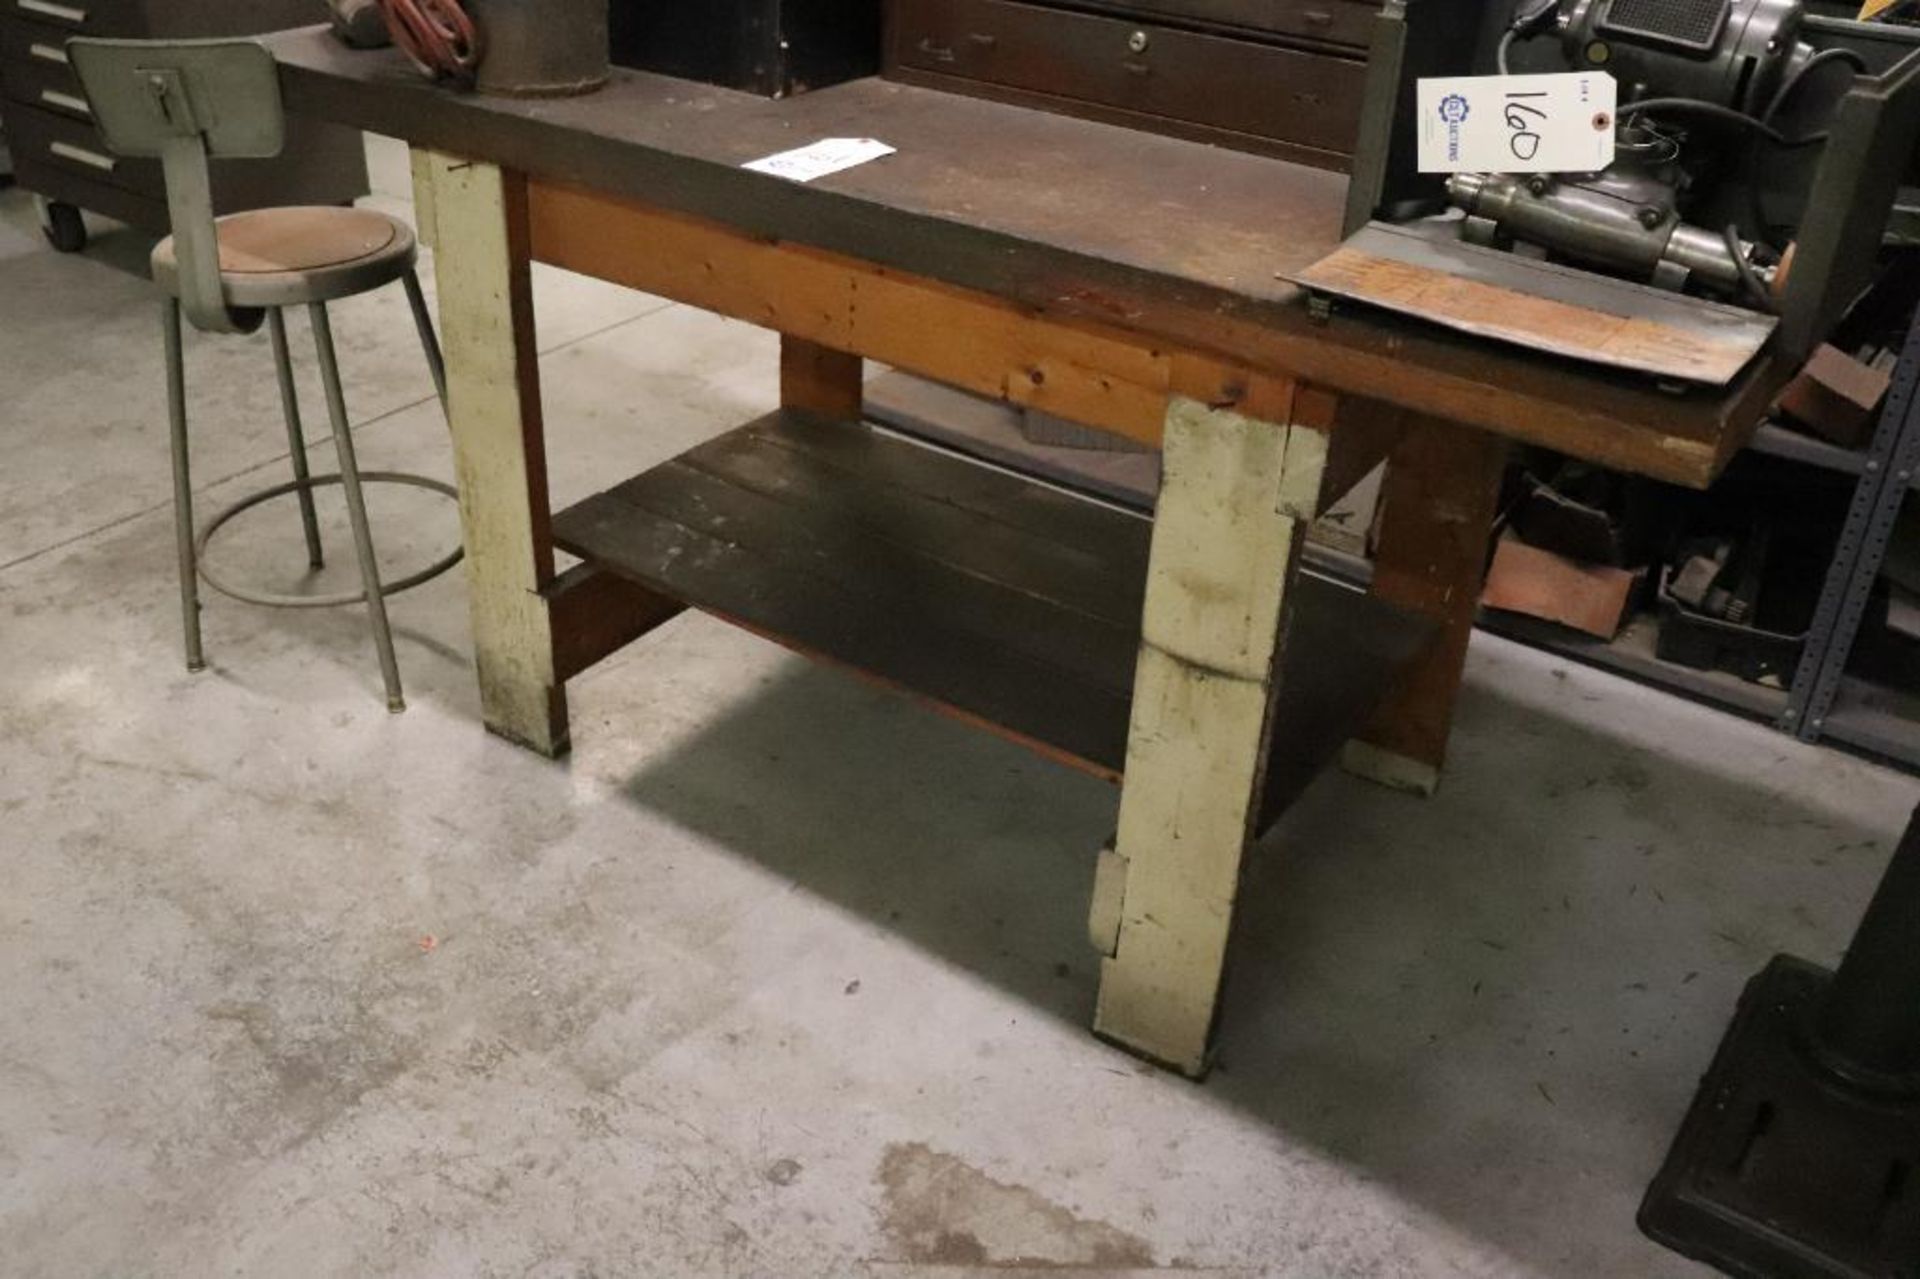 Wooden work bench 26.5" x 72" 34.5"H - Image 2 of 5